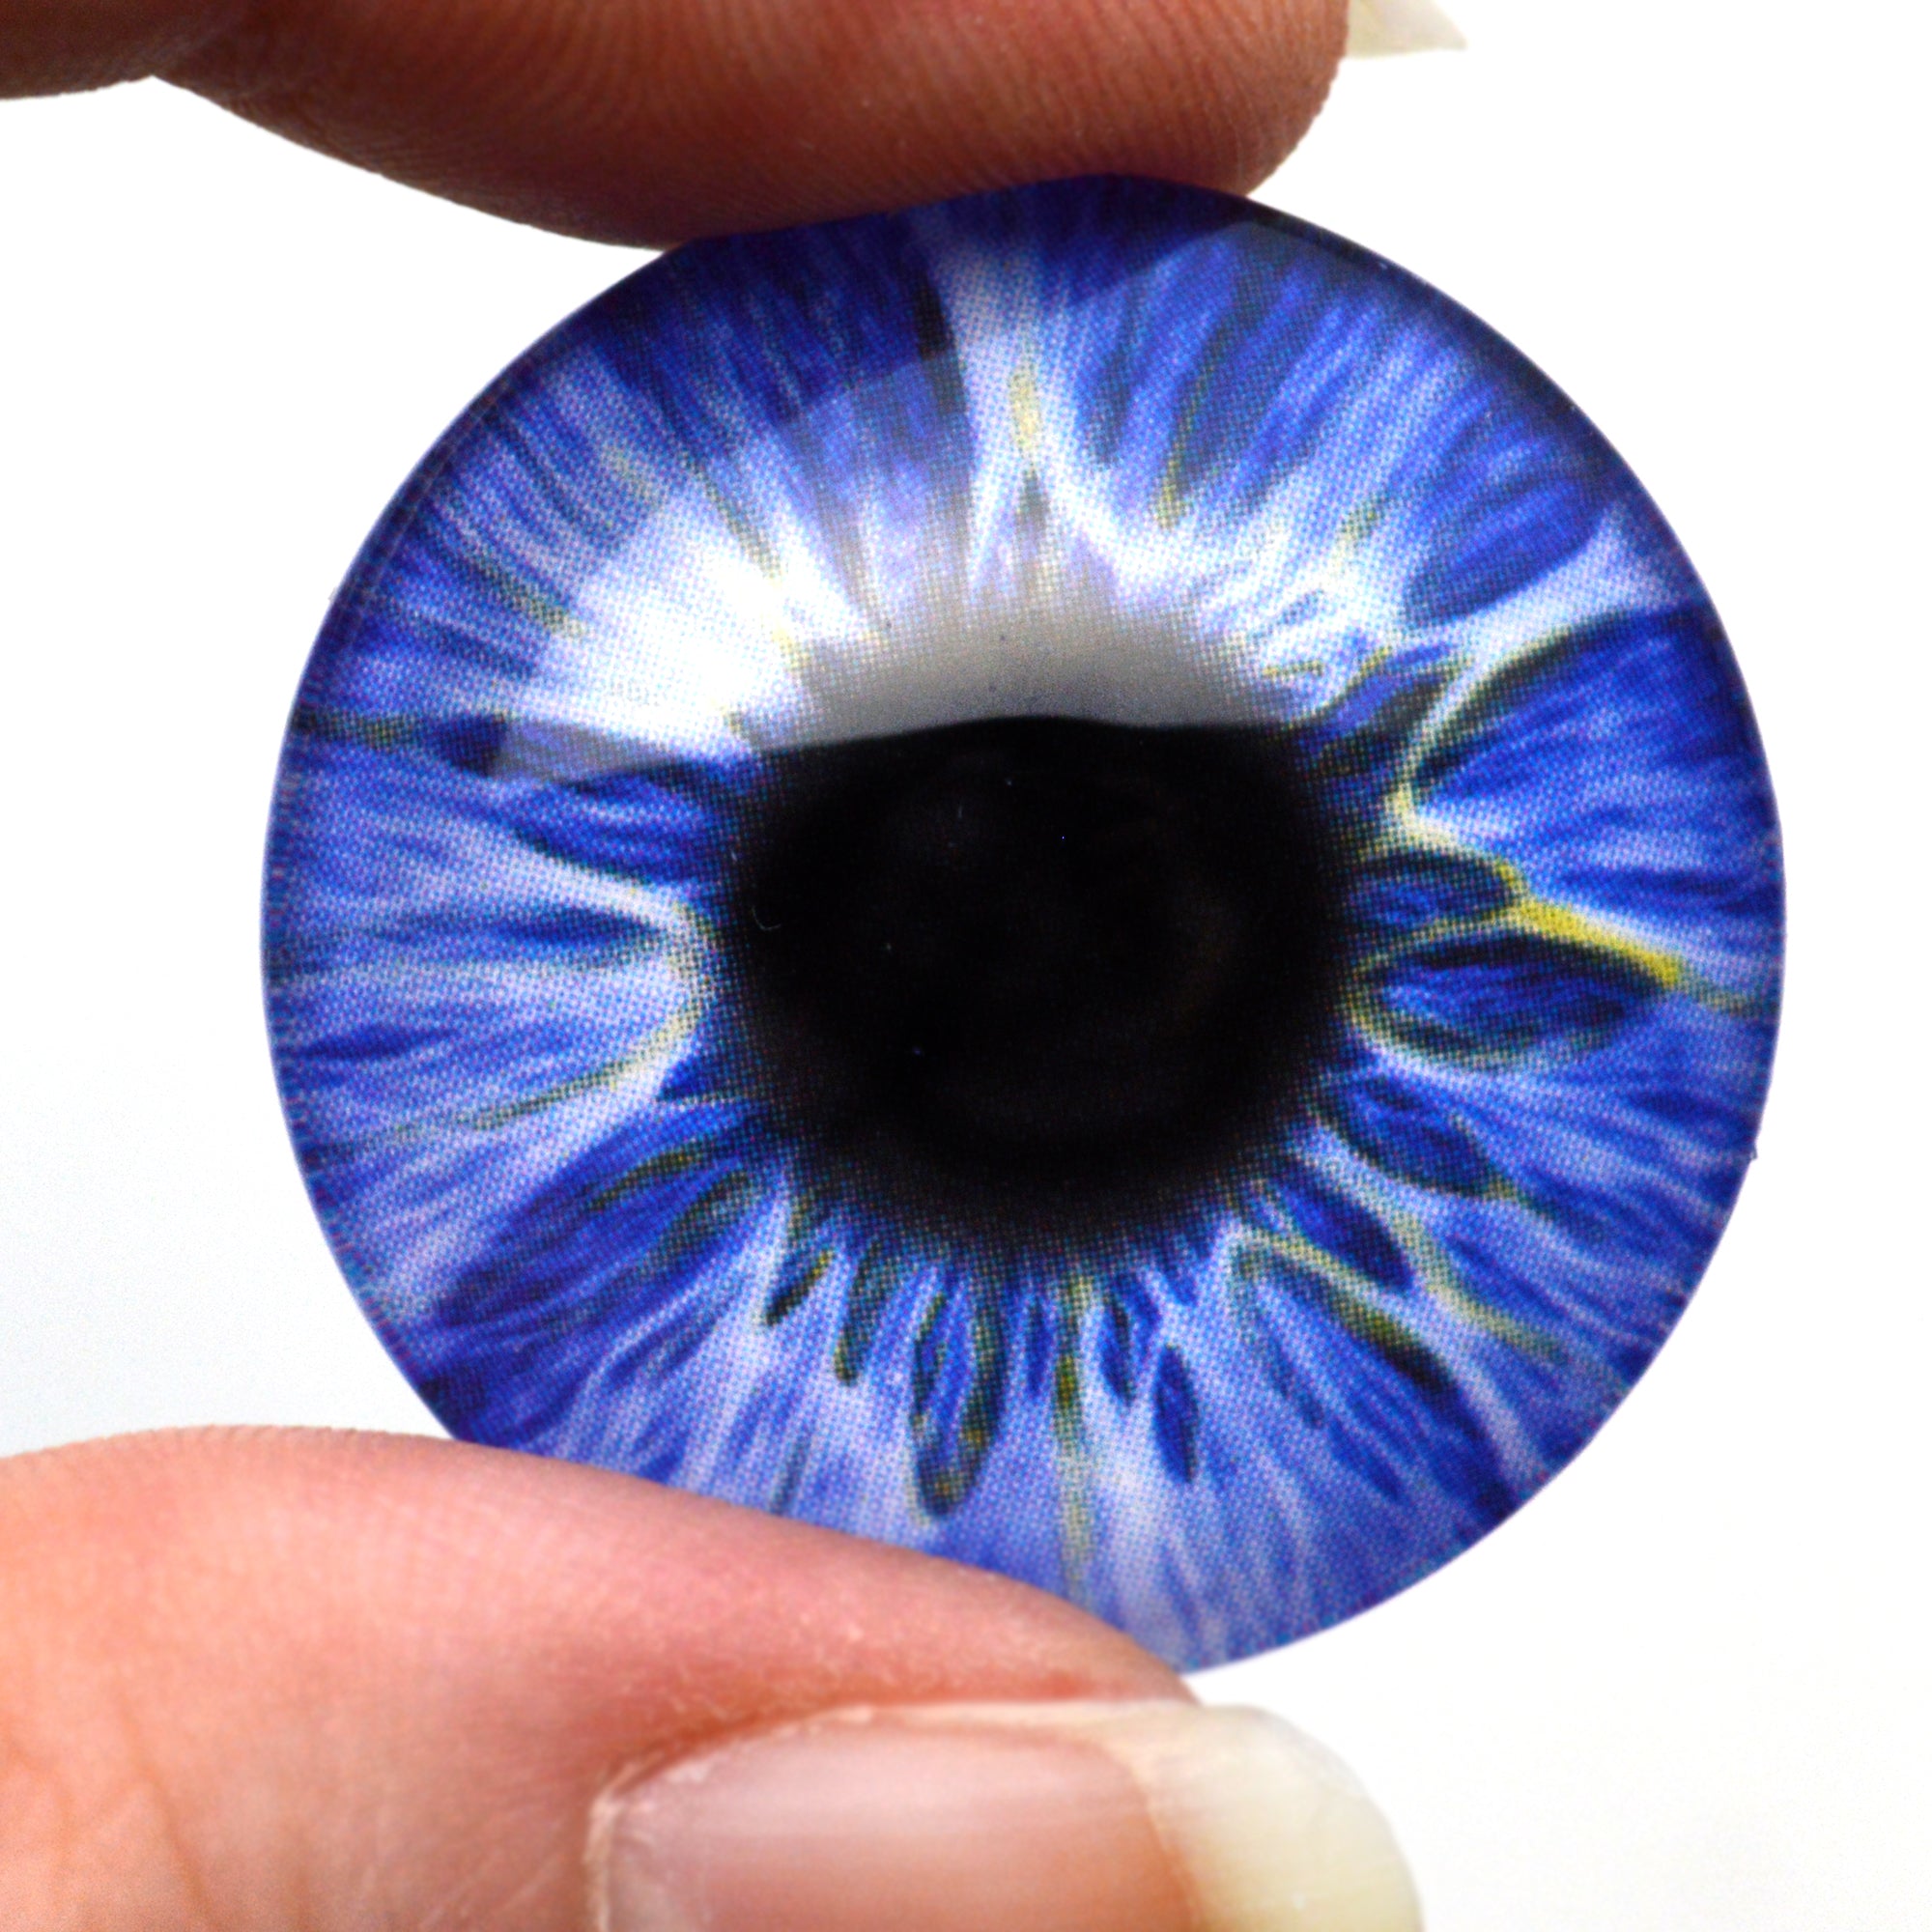 50mm Blue Human Glass Eyes - Large 2 Inch with Scleras – Handmade Glass Eyes